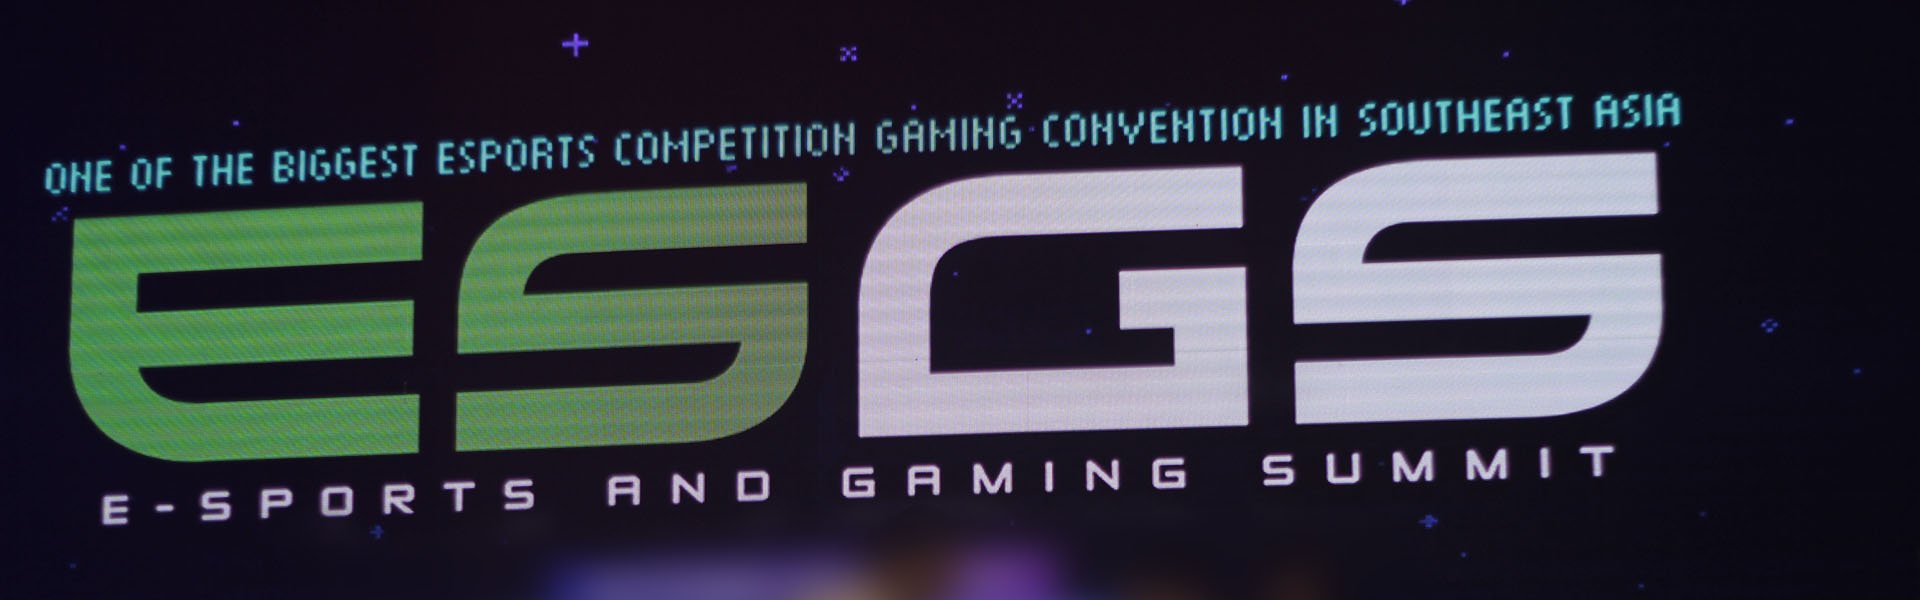 Electronic Sports and Gaming Summit - ESGS 2017 Recap 14